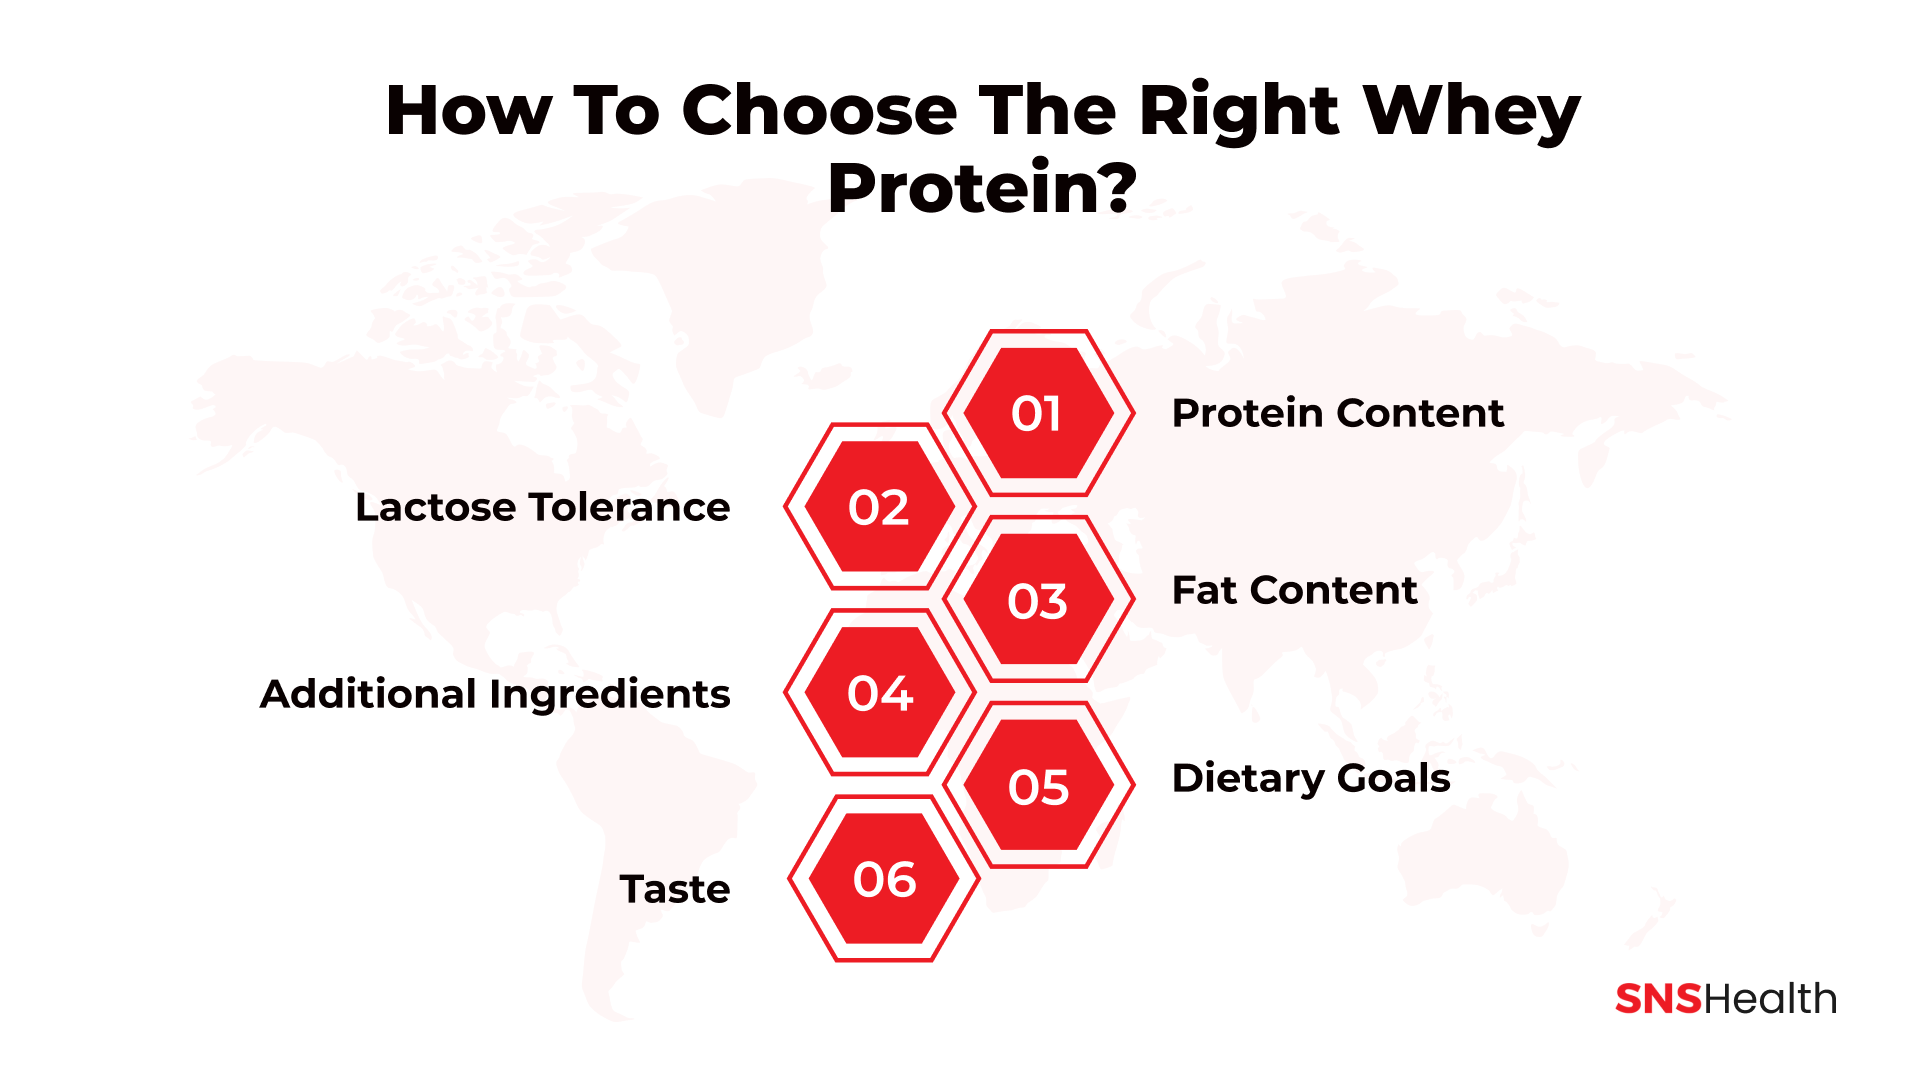 How to Choose the Right Whey Protein